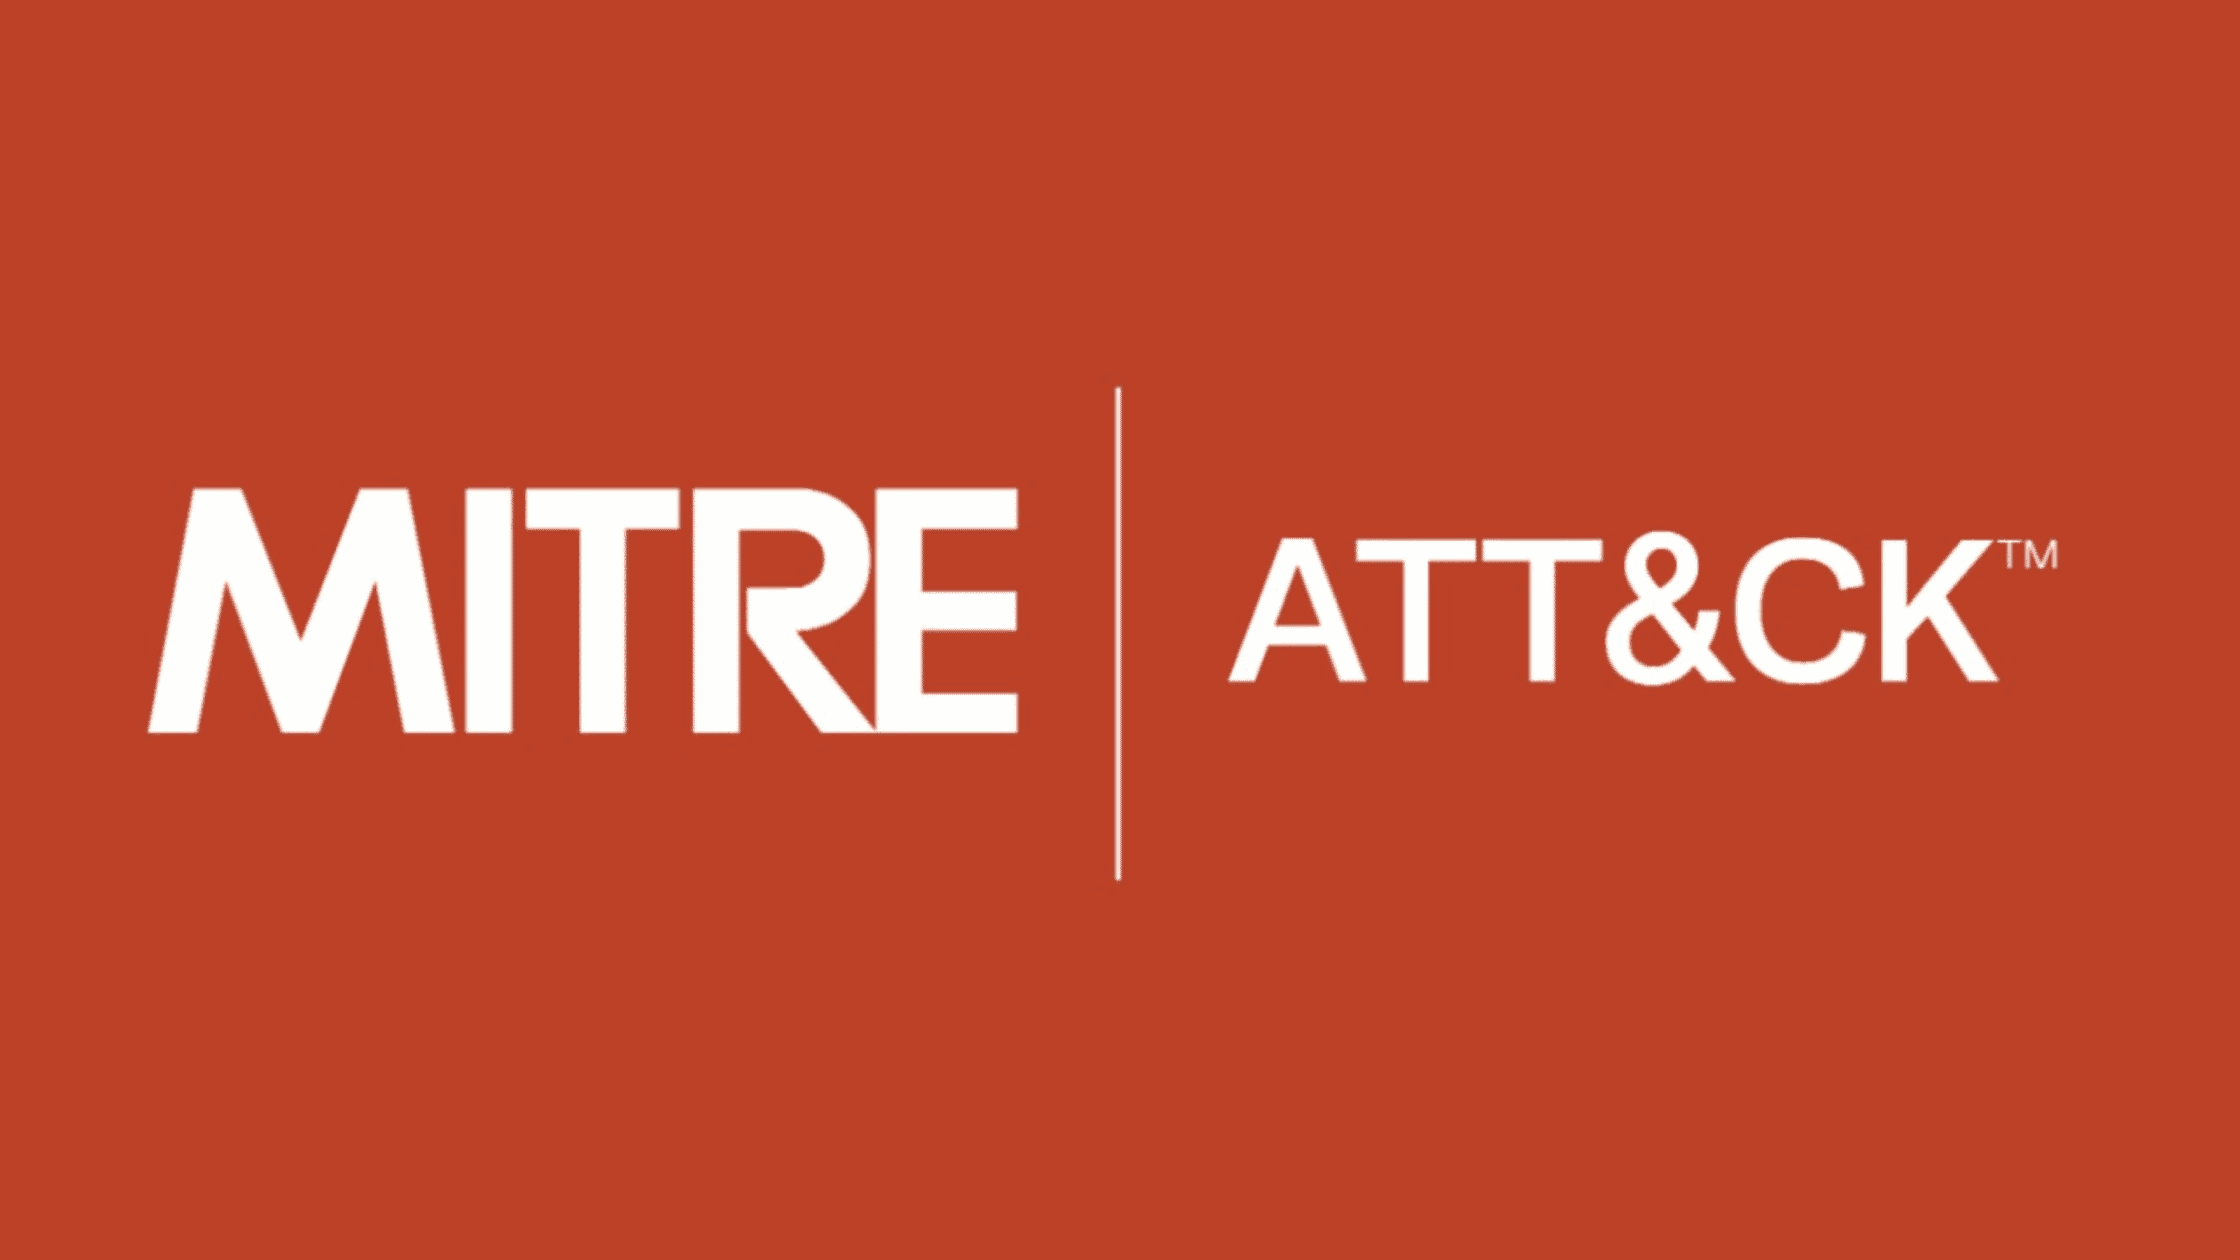 How Can We Use The Mitre Attck Framework For Threat Hunting And How To Hunt Apt Groups Using The Mitre Attck Framework